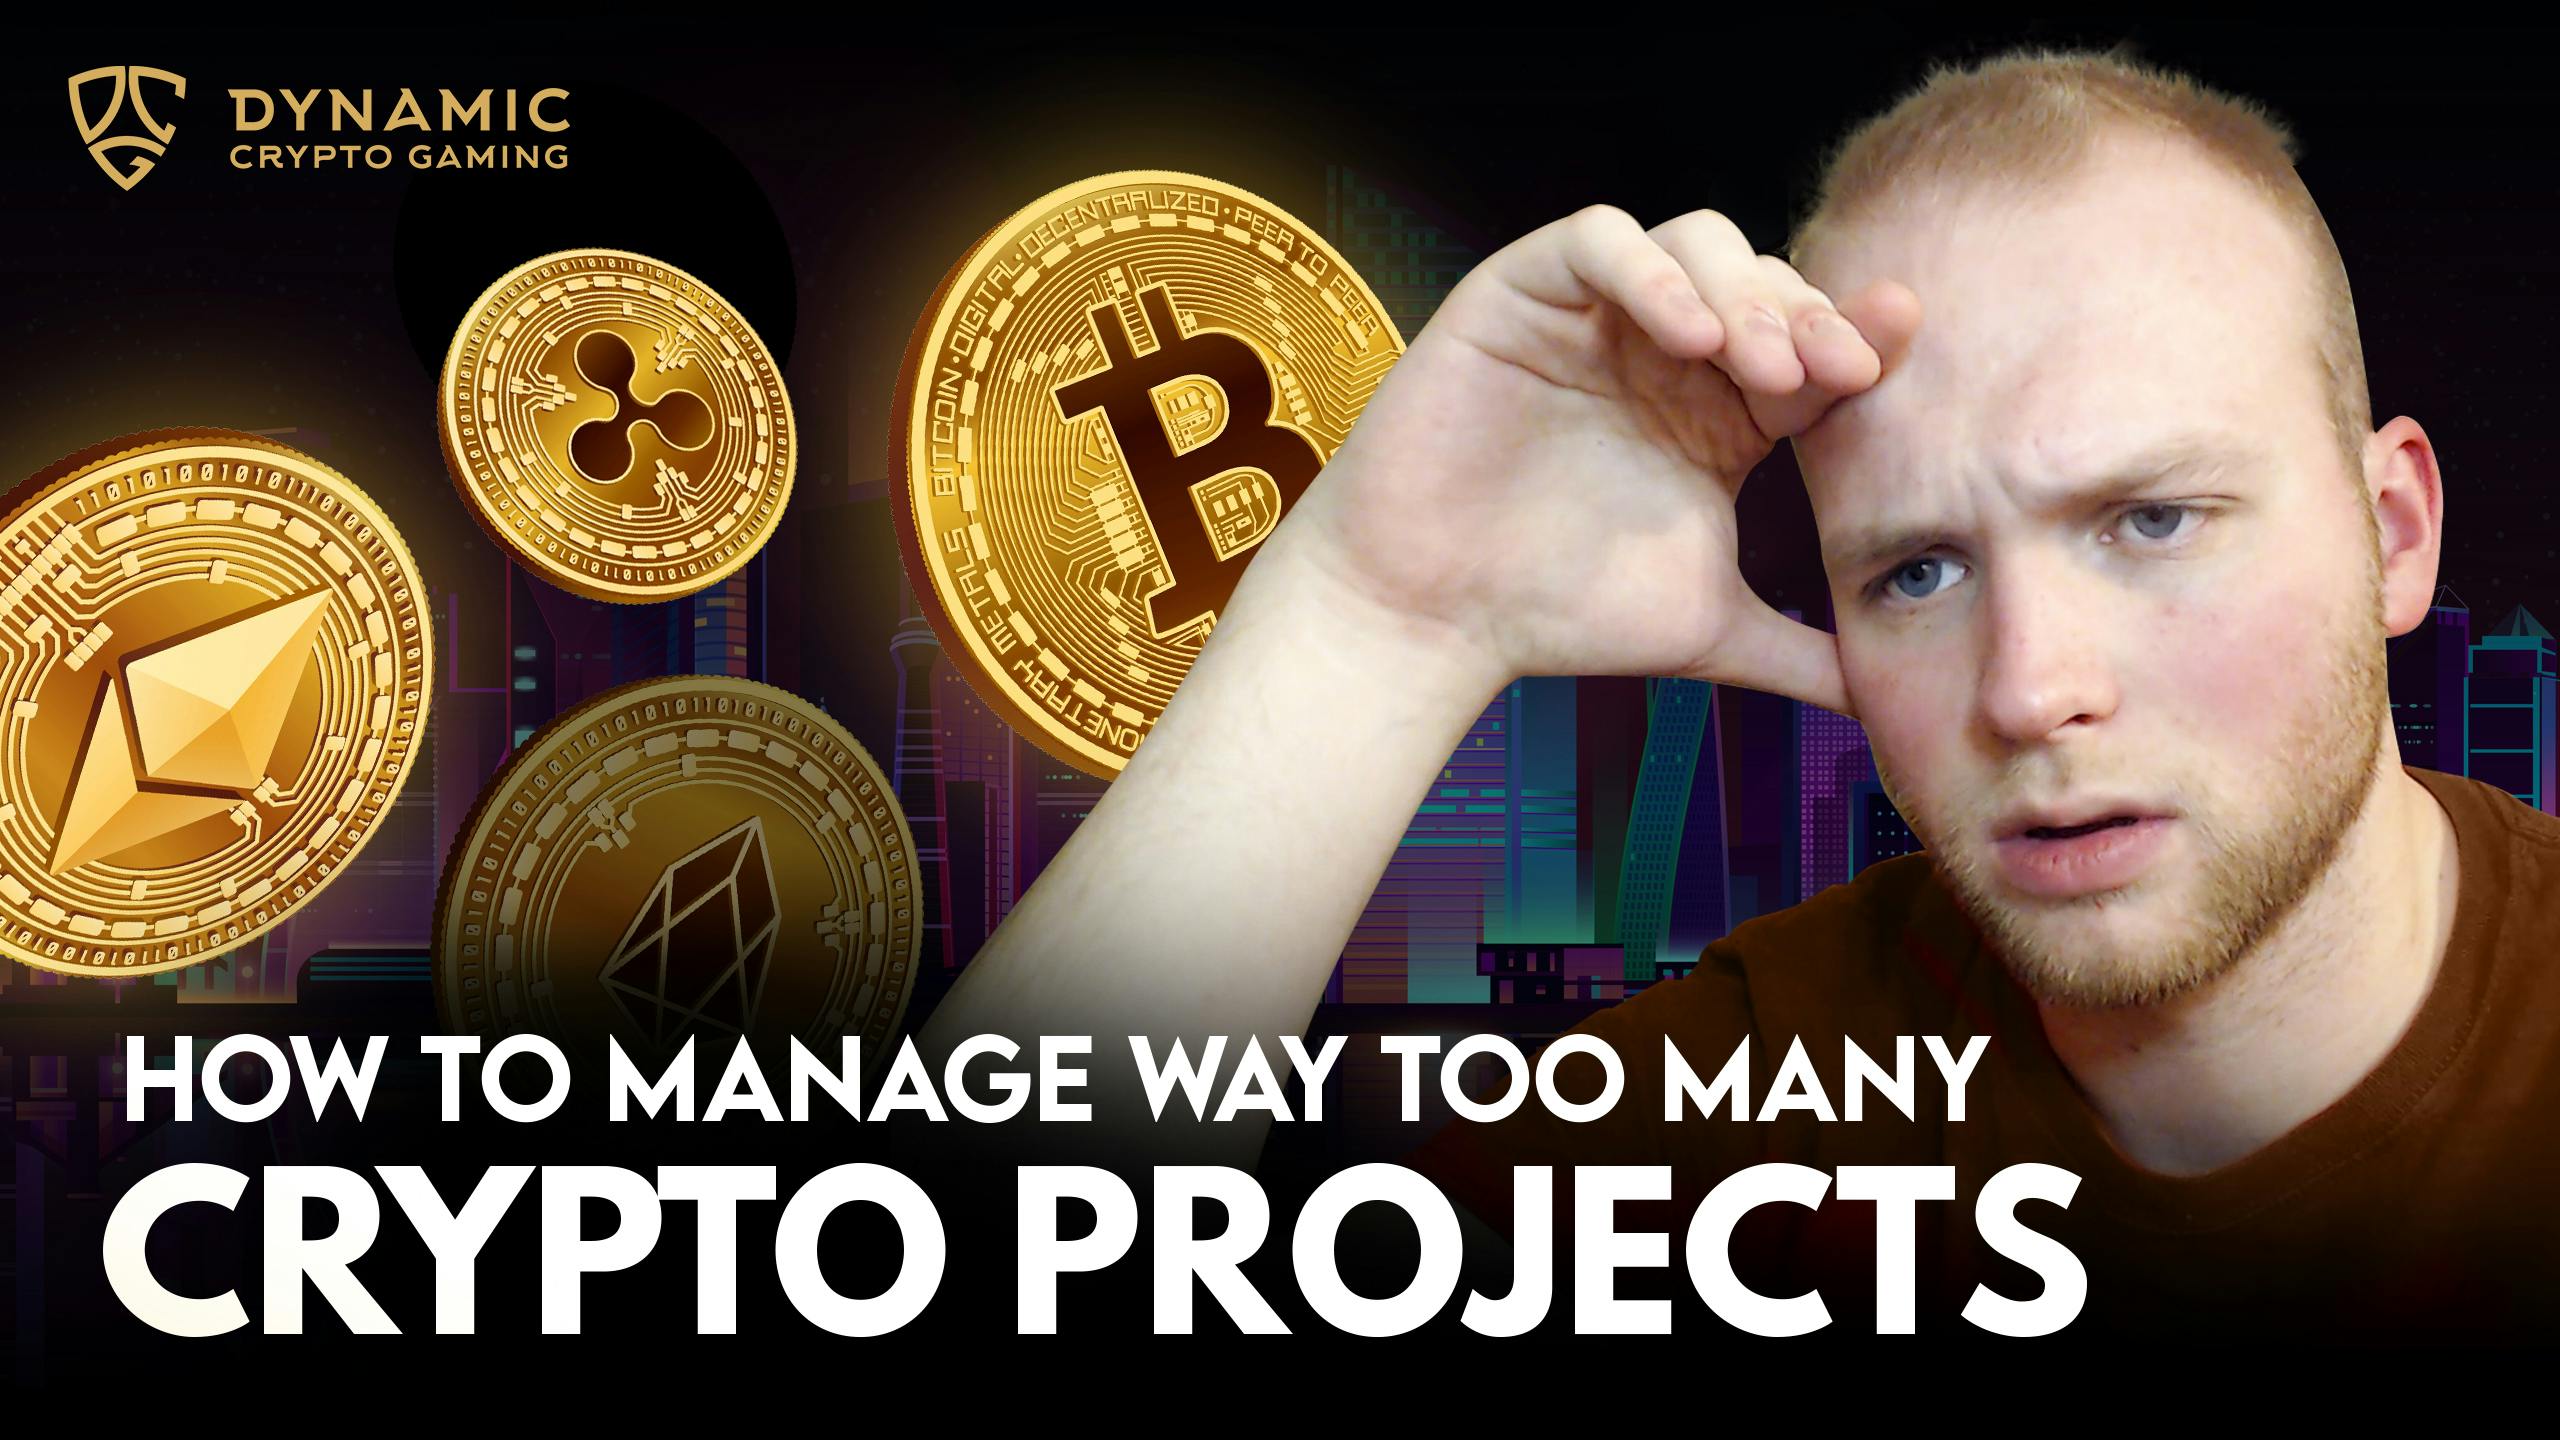 How To Manage Way Too Many Crypto Projects